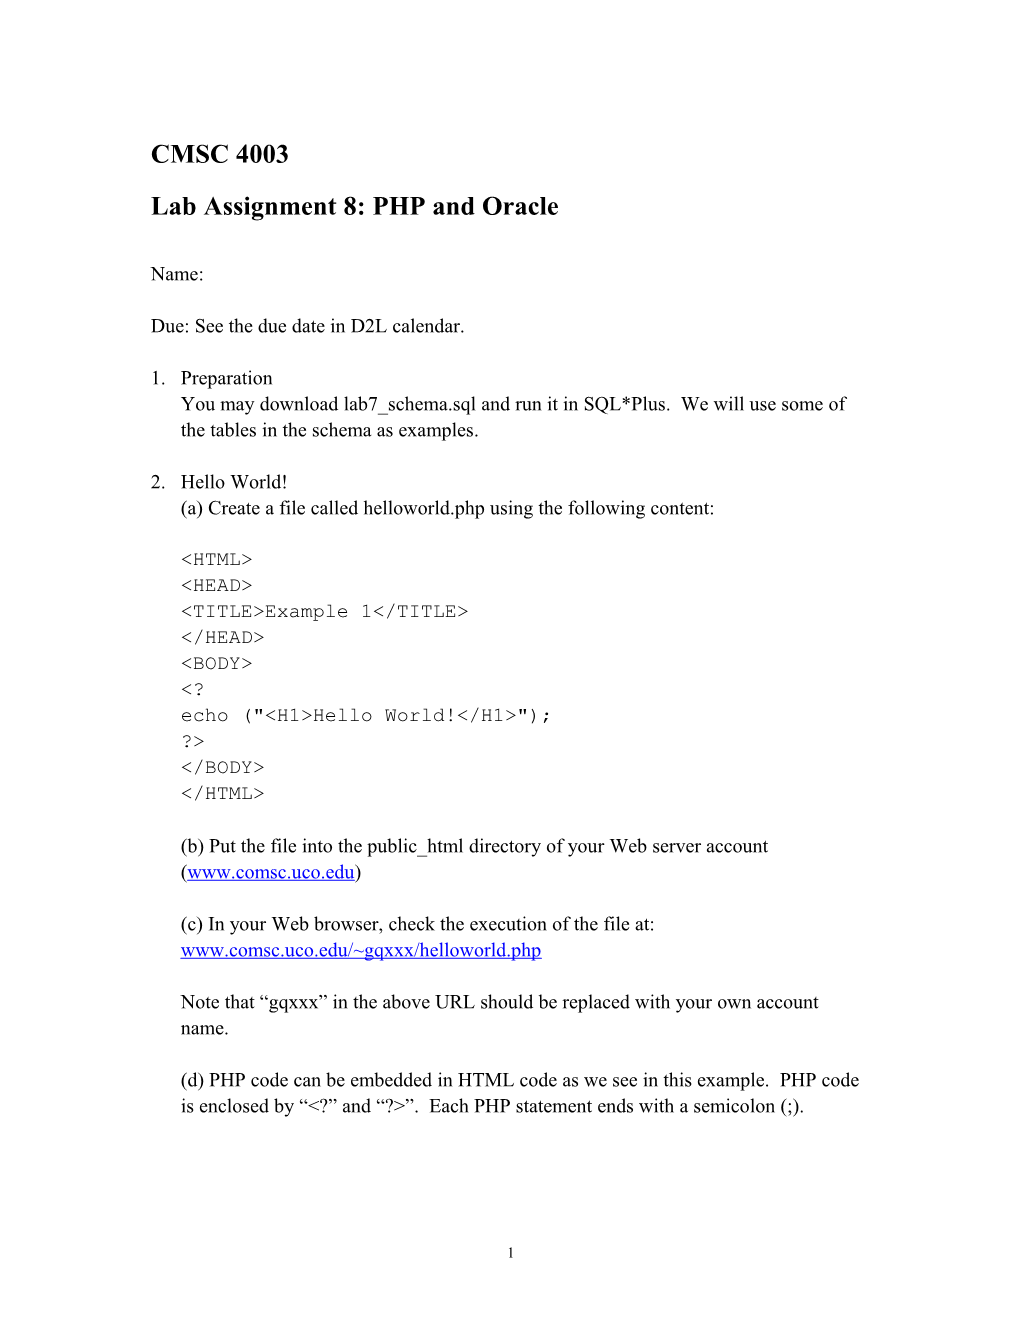 Lab Assignment8: PHP and Oracle